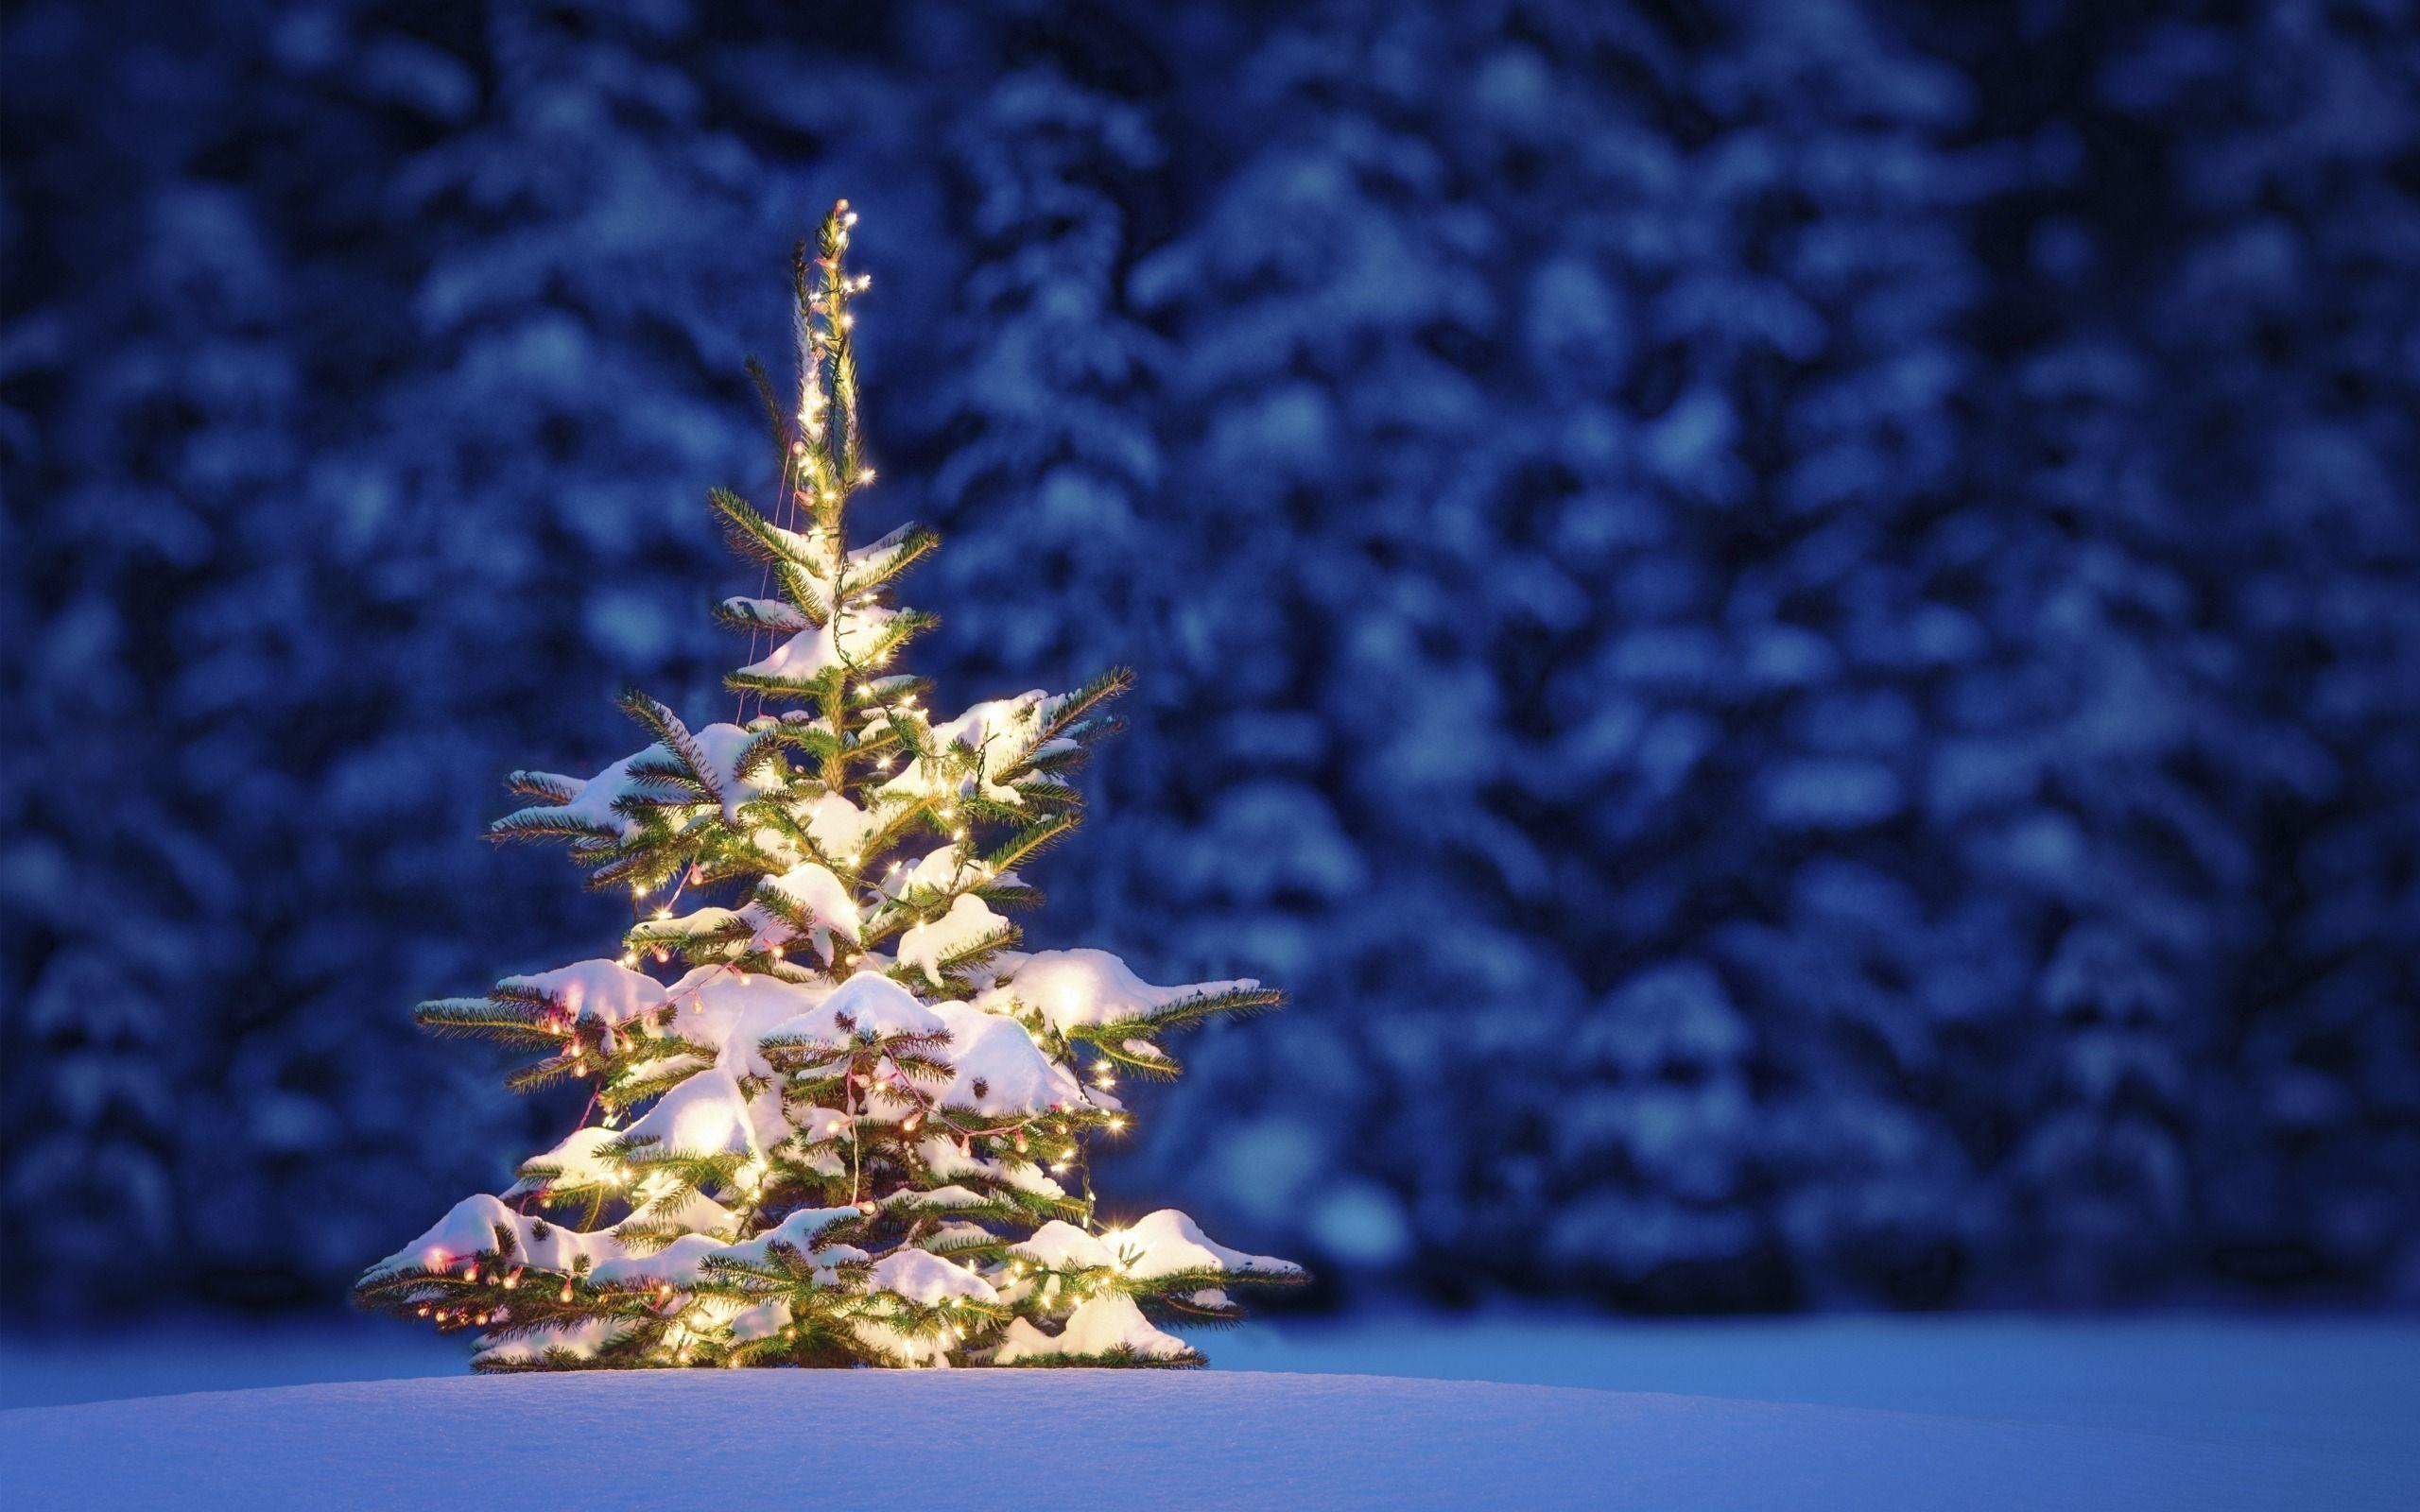 Beautiful Christmas Tree In Snow Wallpapers - Wallpaper Cave